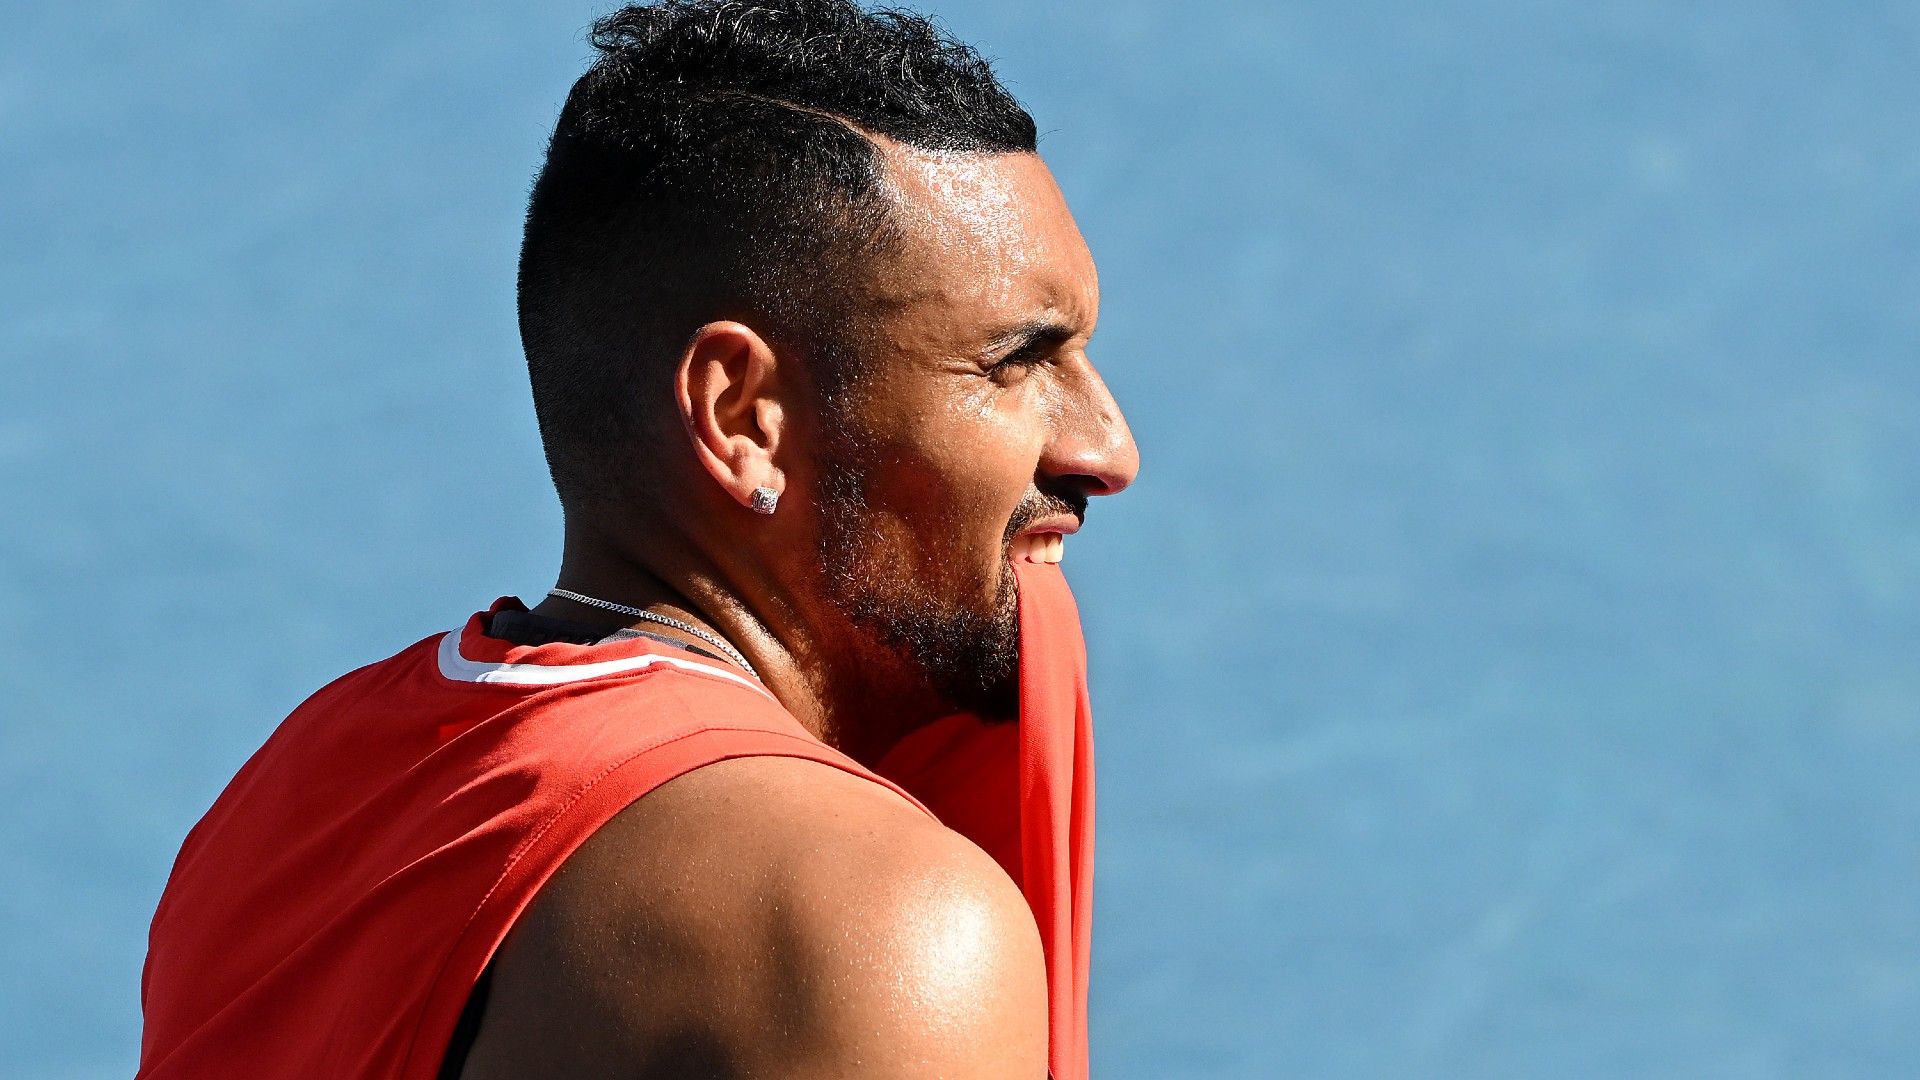 Nick Kyrgios speaks about COVID struggles ahead of match with Daniil Medvedev